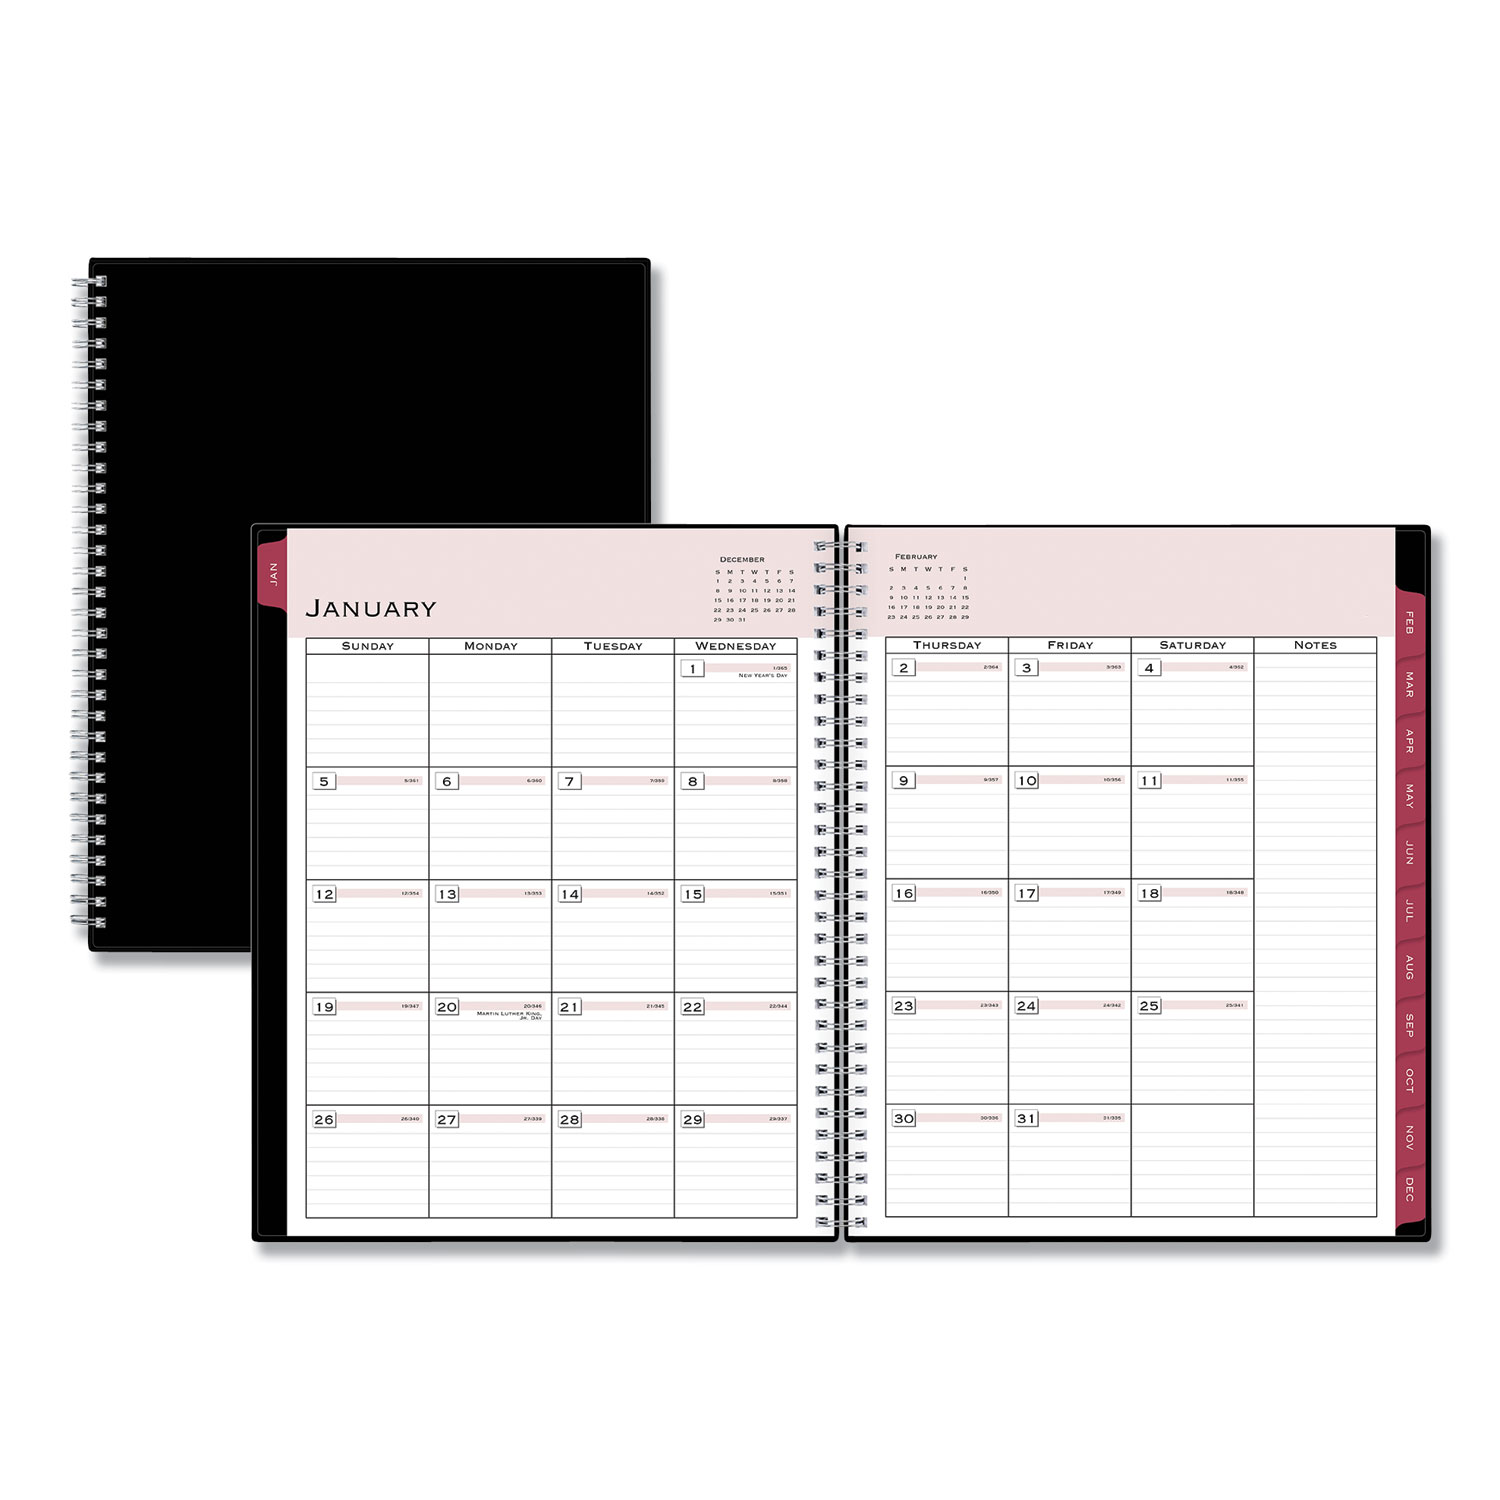  Blue Sky 111288 Classic Red Weekly/Monthly Planner, Open Scheduling, 11 x 8 1/2, Black Cover, 2020 (BLS111288) 